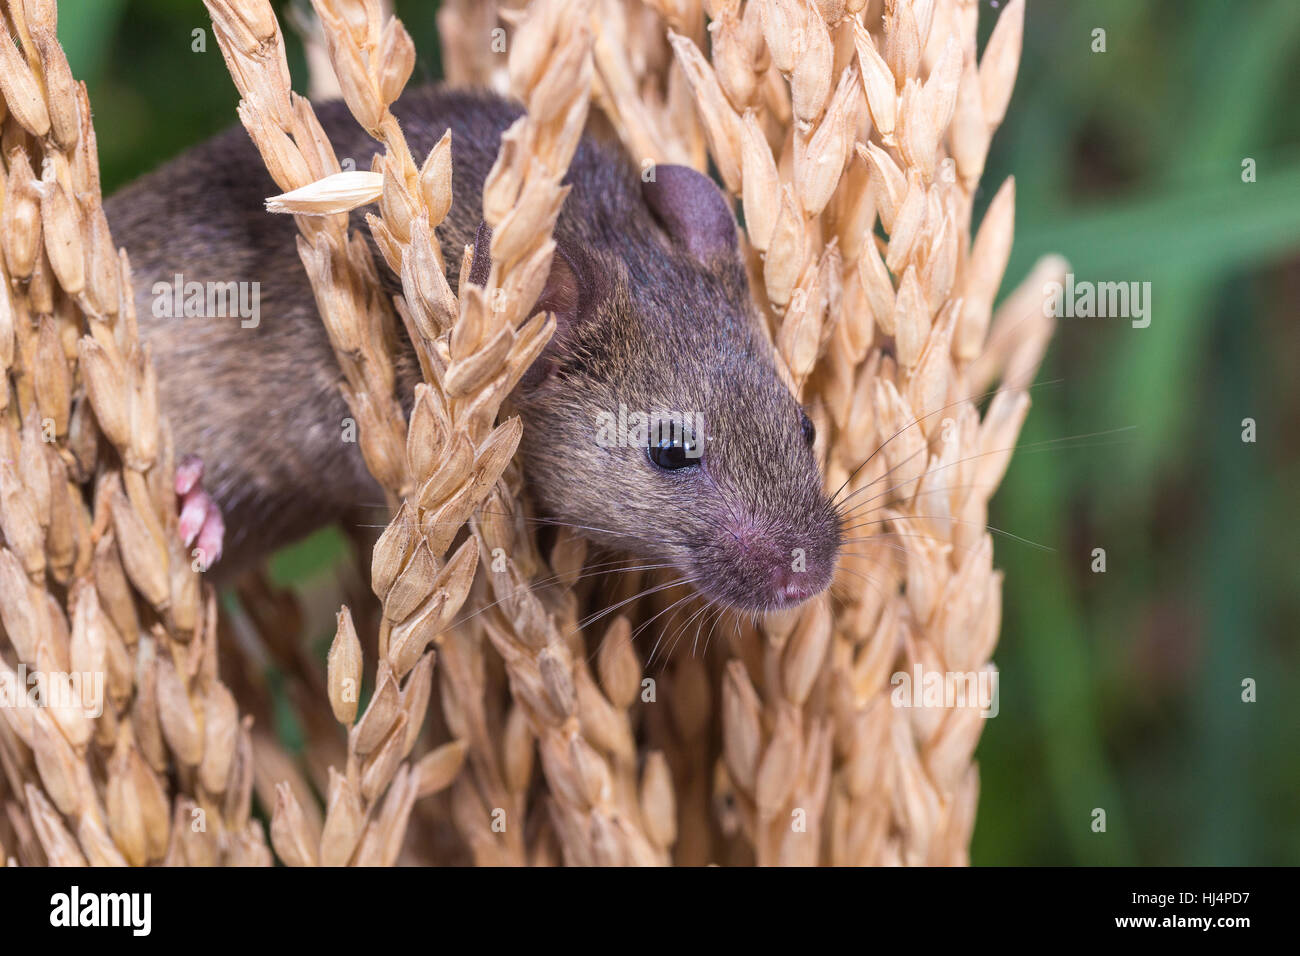 Brattleboro rat, mouse in the rice plant, eating rice seed Stock Photo